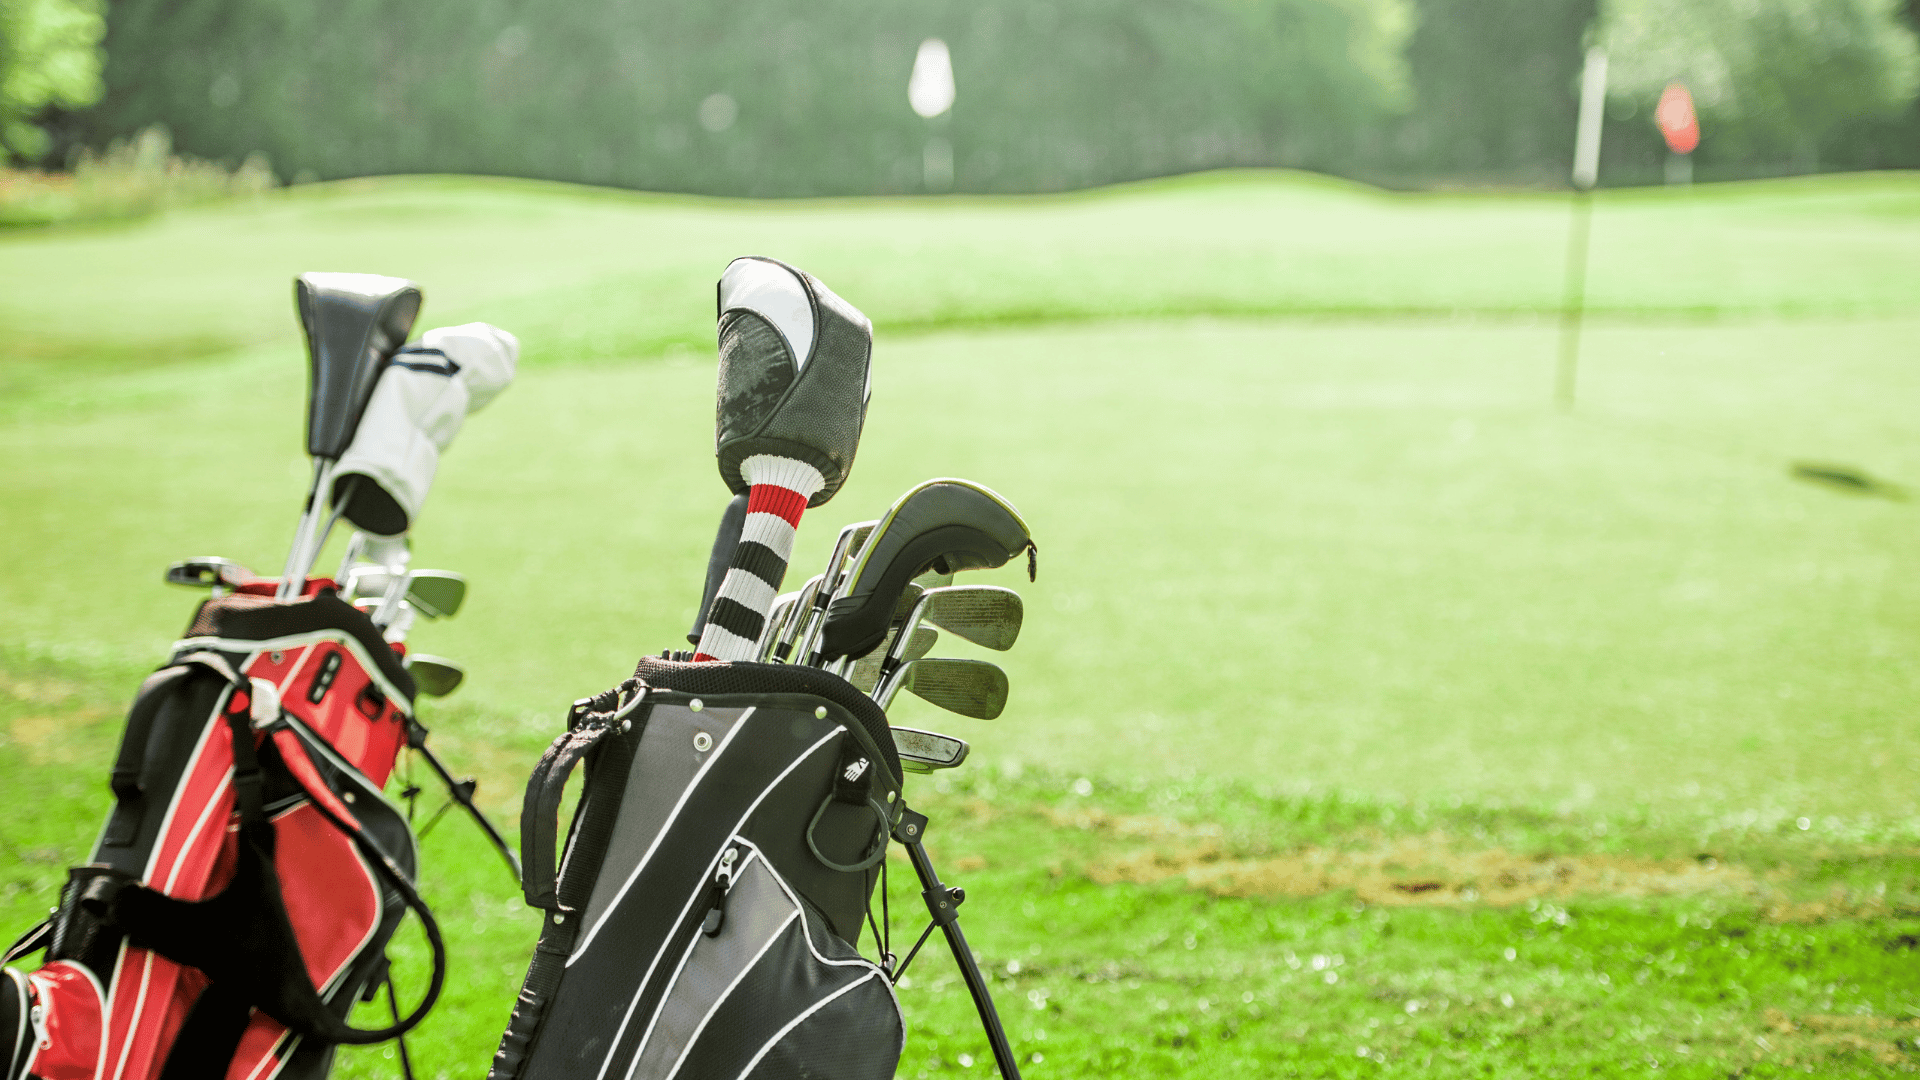 The Ideal Number of Wedges You Should Have in your Golf Bag